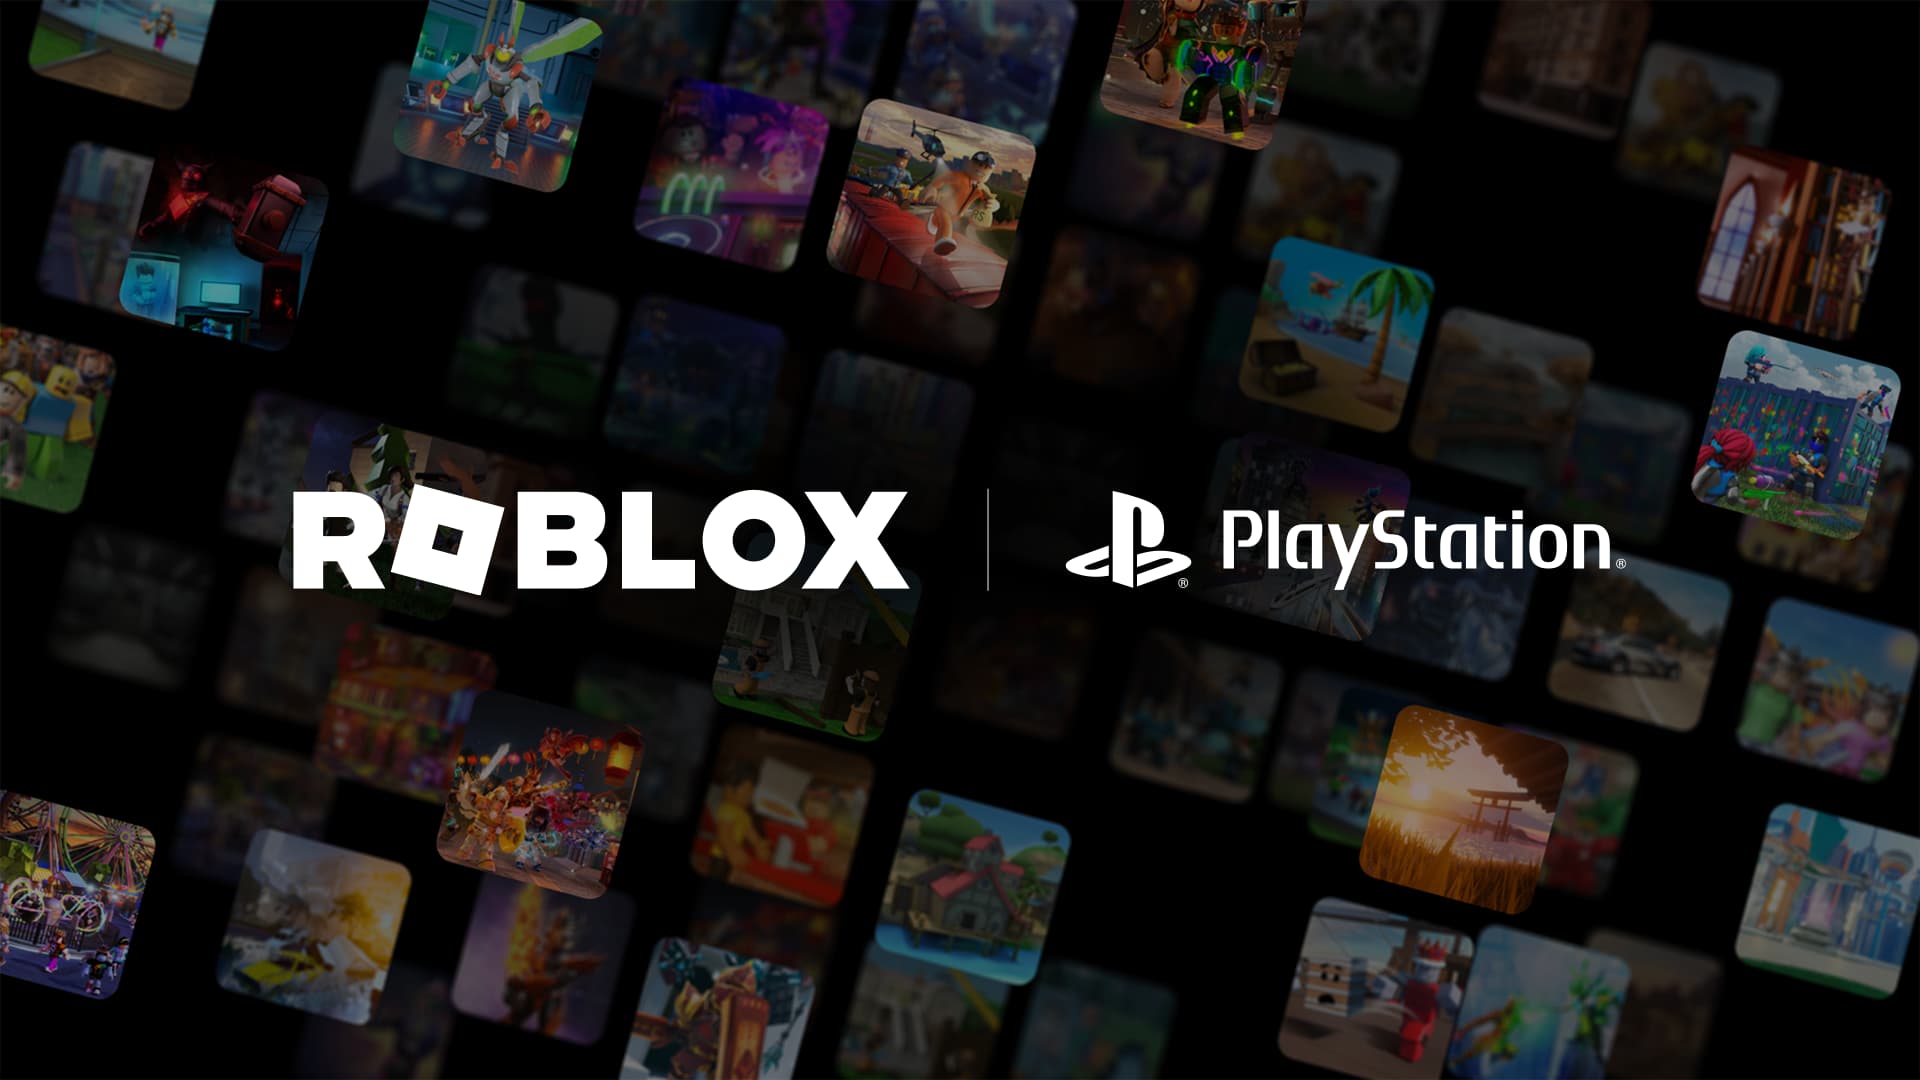 WHY ROBLOX IS NOT ON PS4 - Will it Release and Come To PS4? 